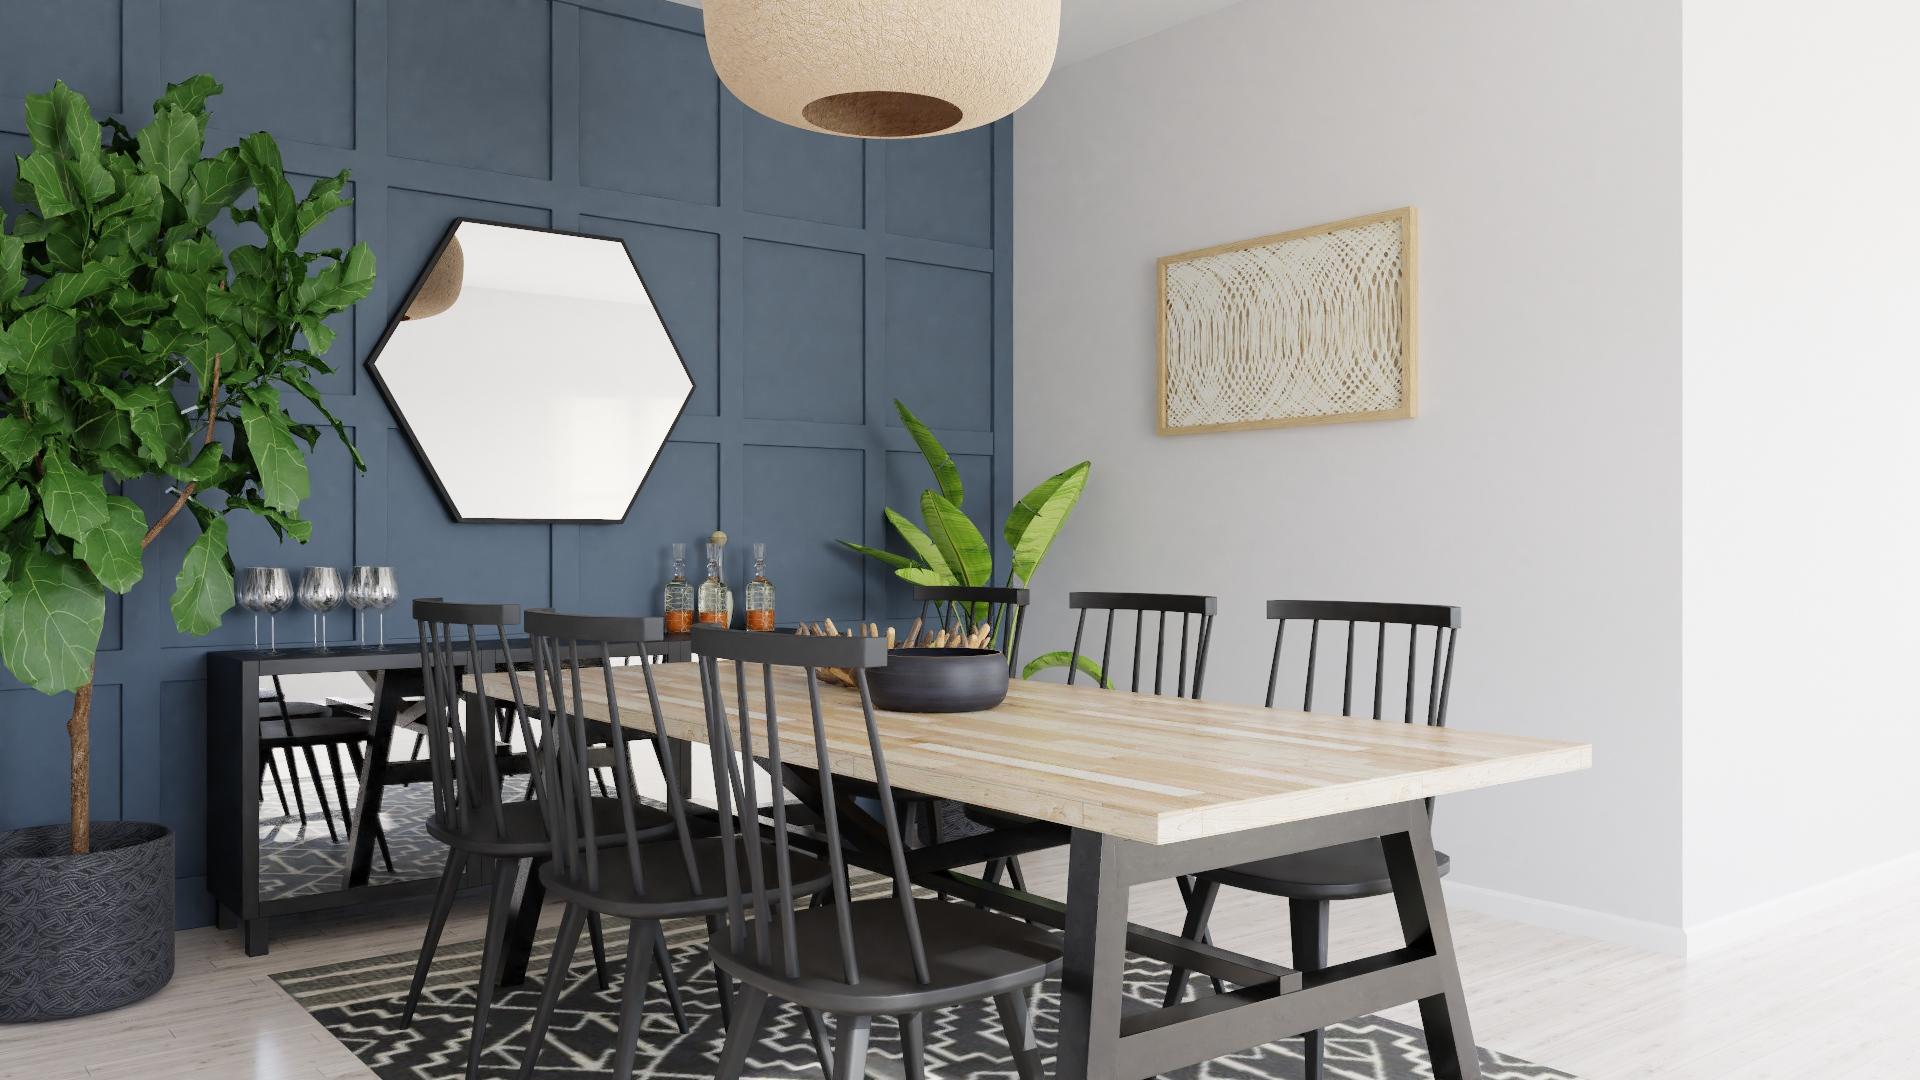 Modern Farmhouse Design With Dinner Party Seating